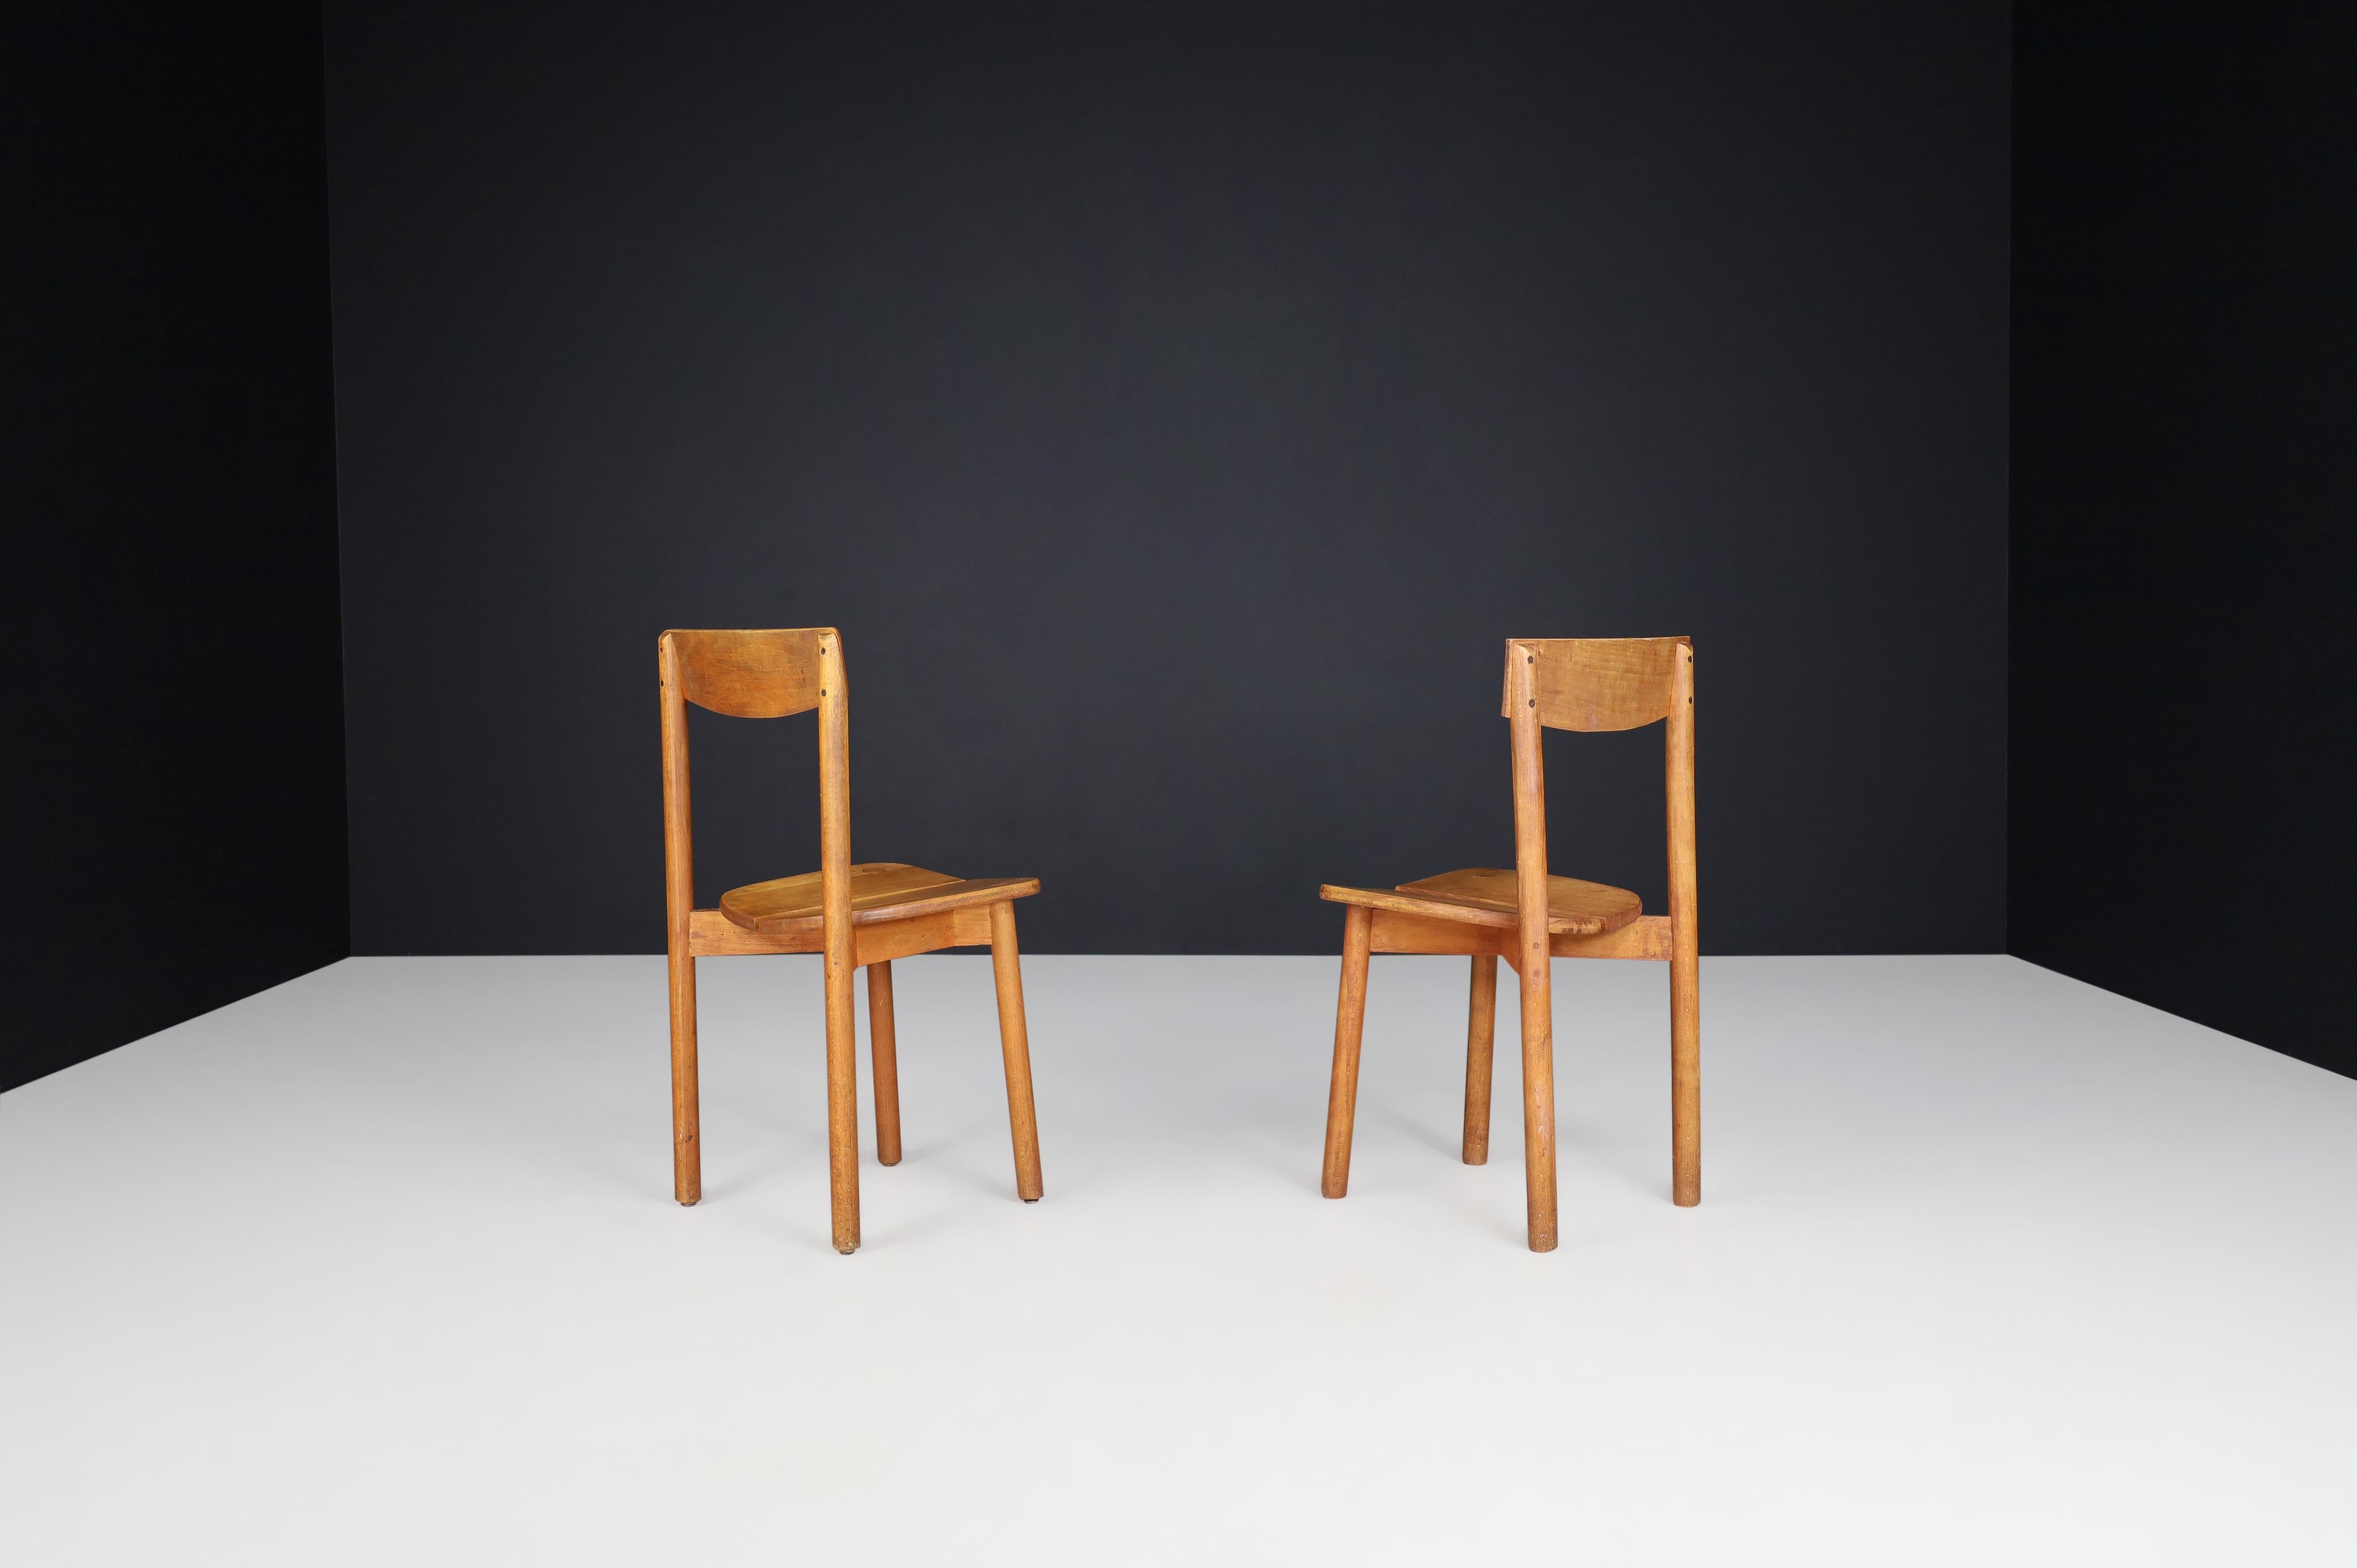 Pierre Gautier Solid Beech Chairs, France, 1960s For Sale 1